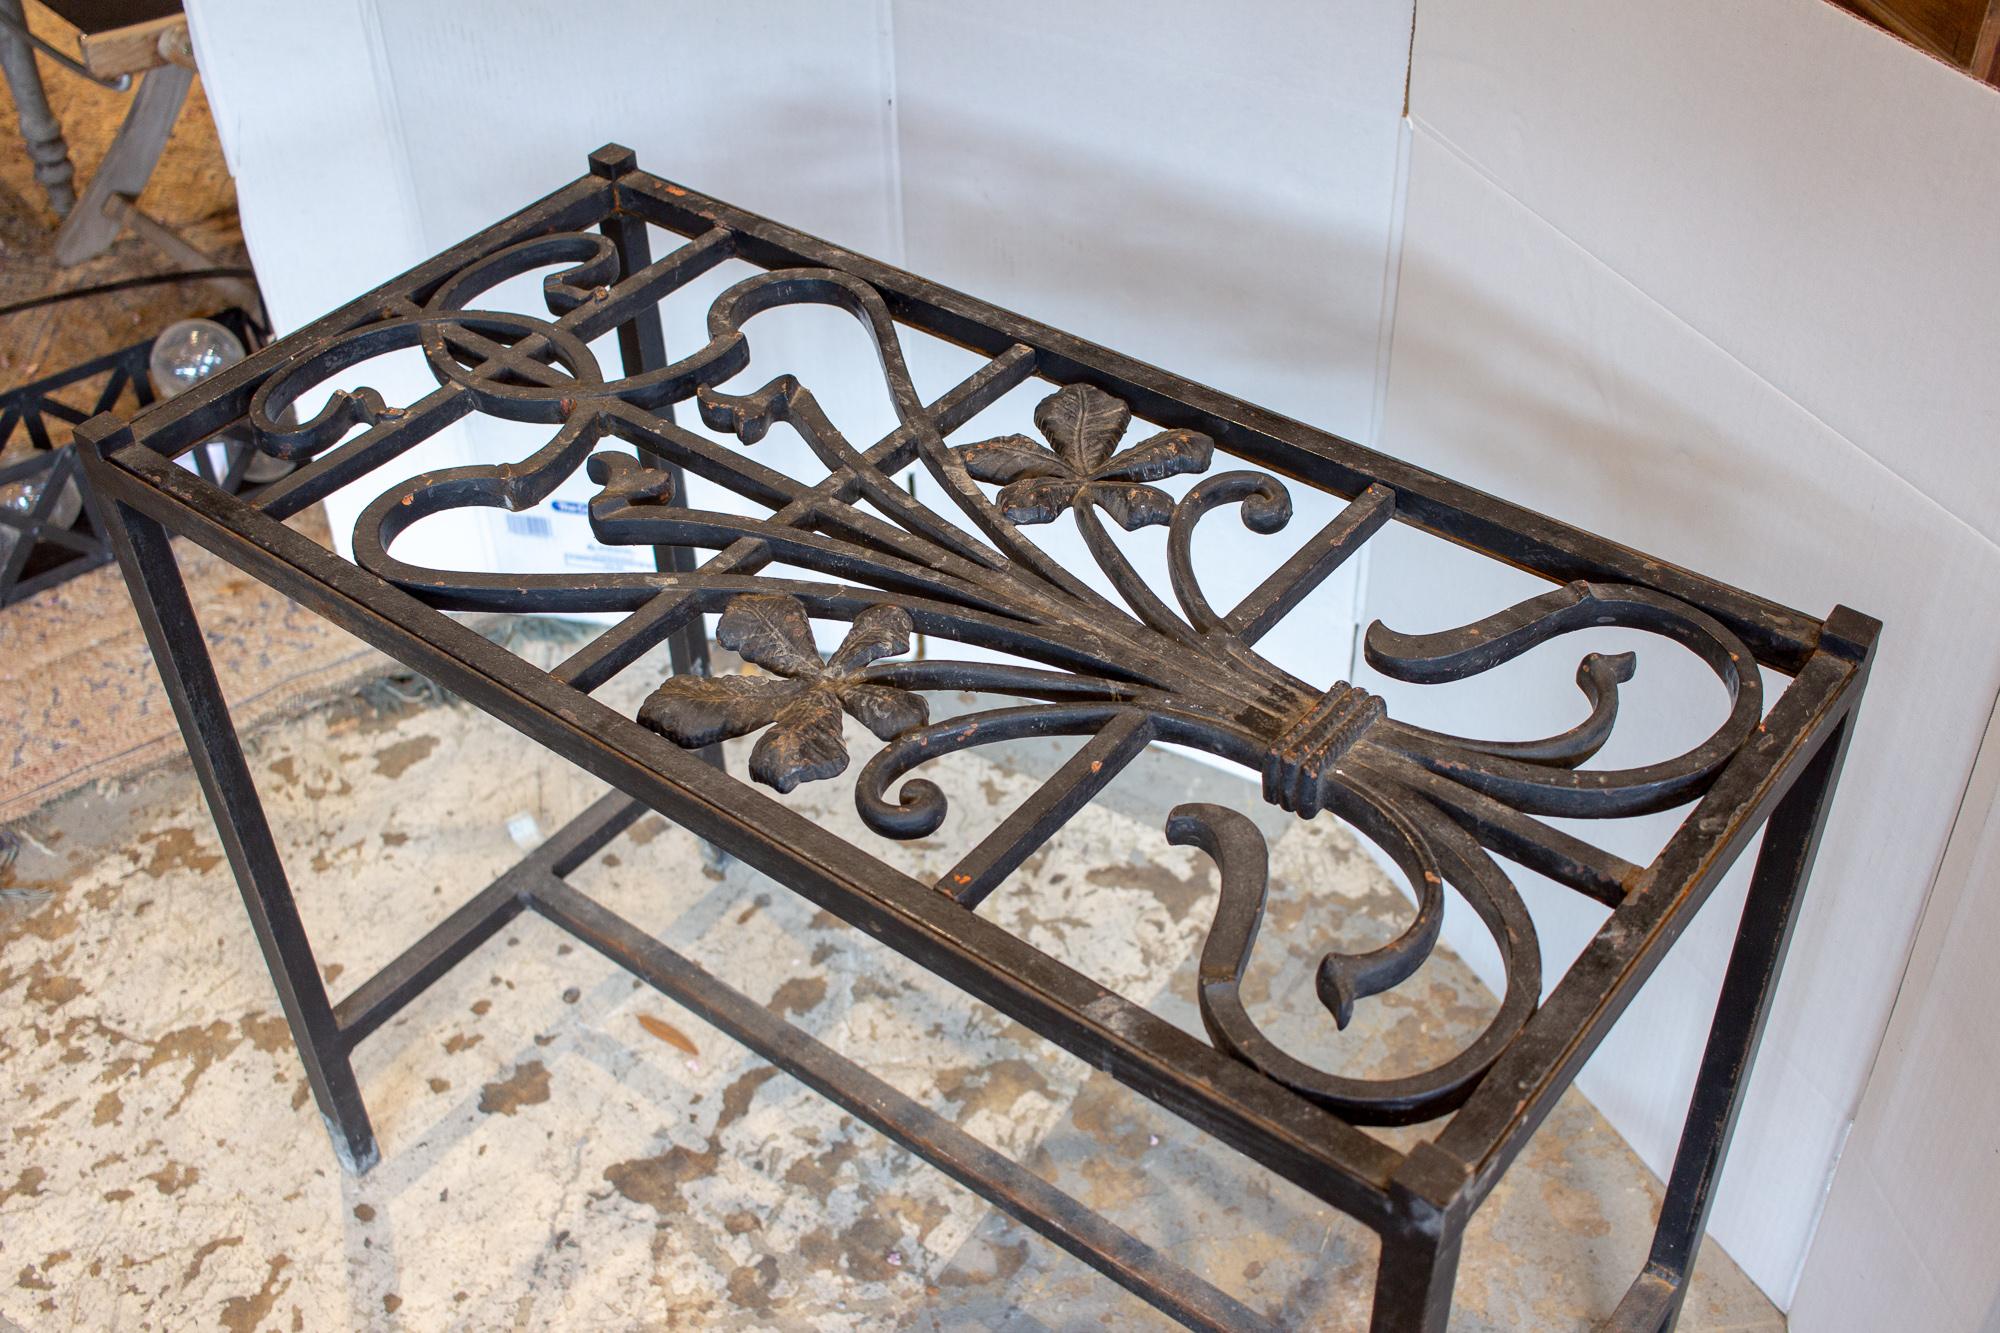 This iron console table has been crafted with a wonderful, iron Art Nouveau top, with a simple wrought iron table frame. The piece could be used indoors or out, as a small accent table. The floral details of the top make a feminine statement piece